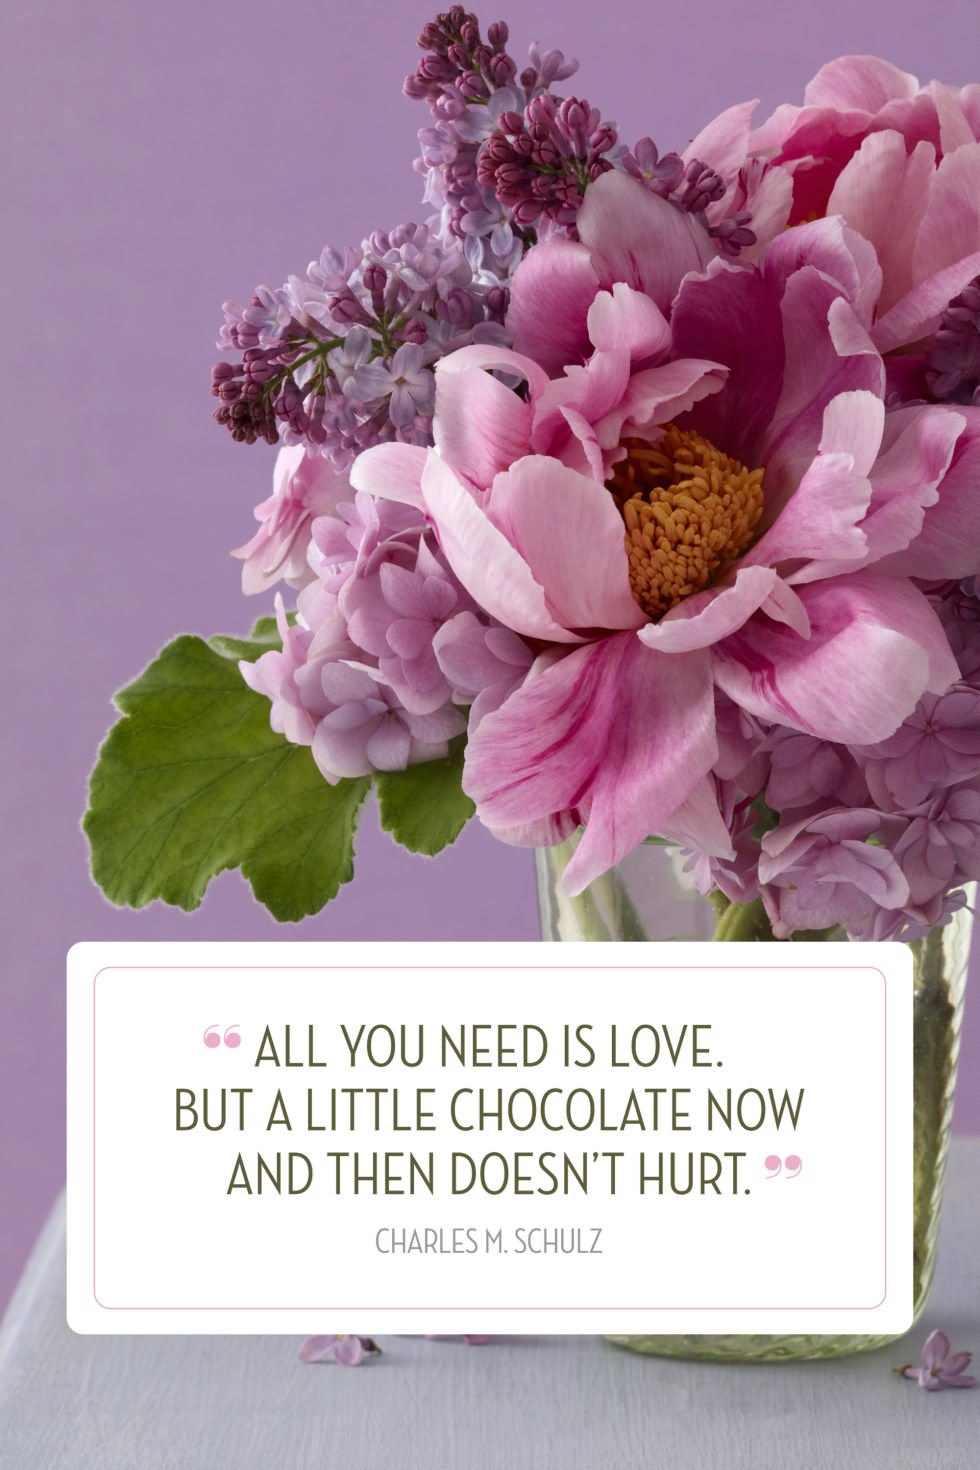 all you need is love. but a little chocolate now and then doesn't heart.